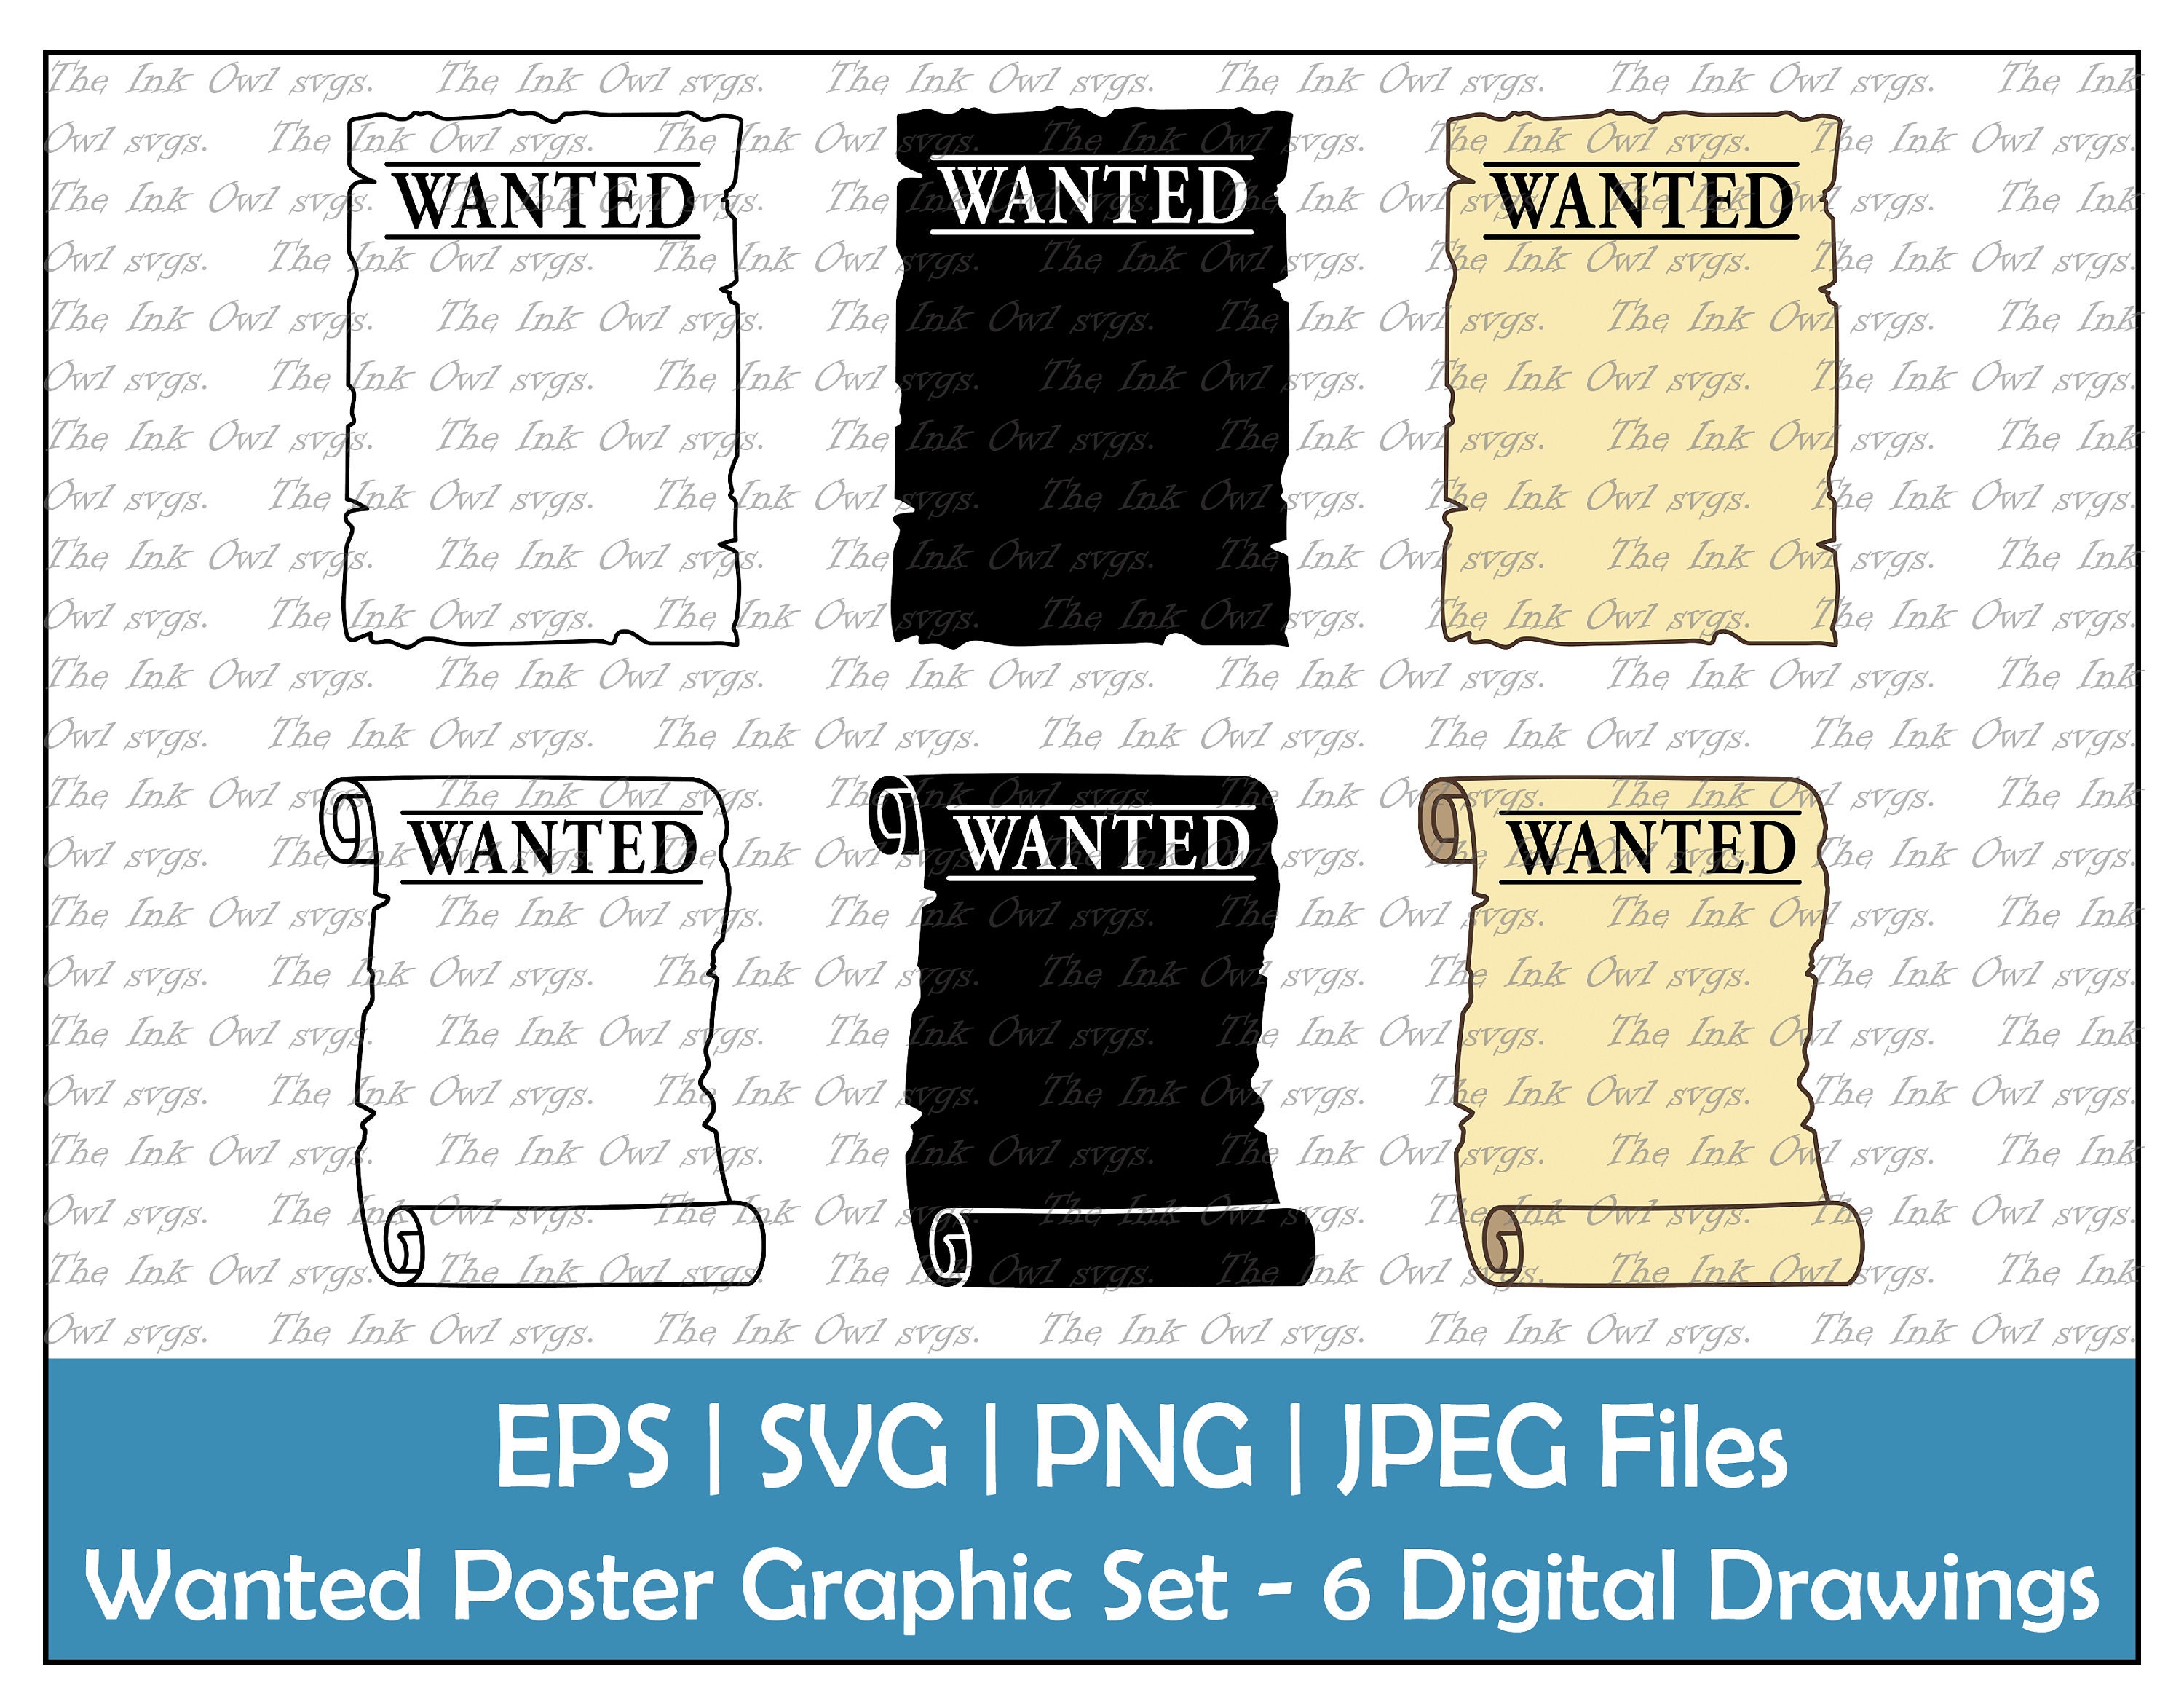 free wanted poster templates